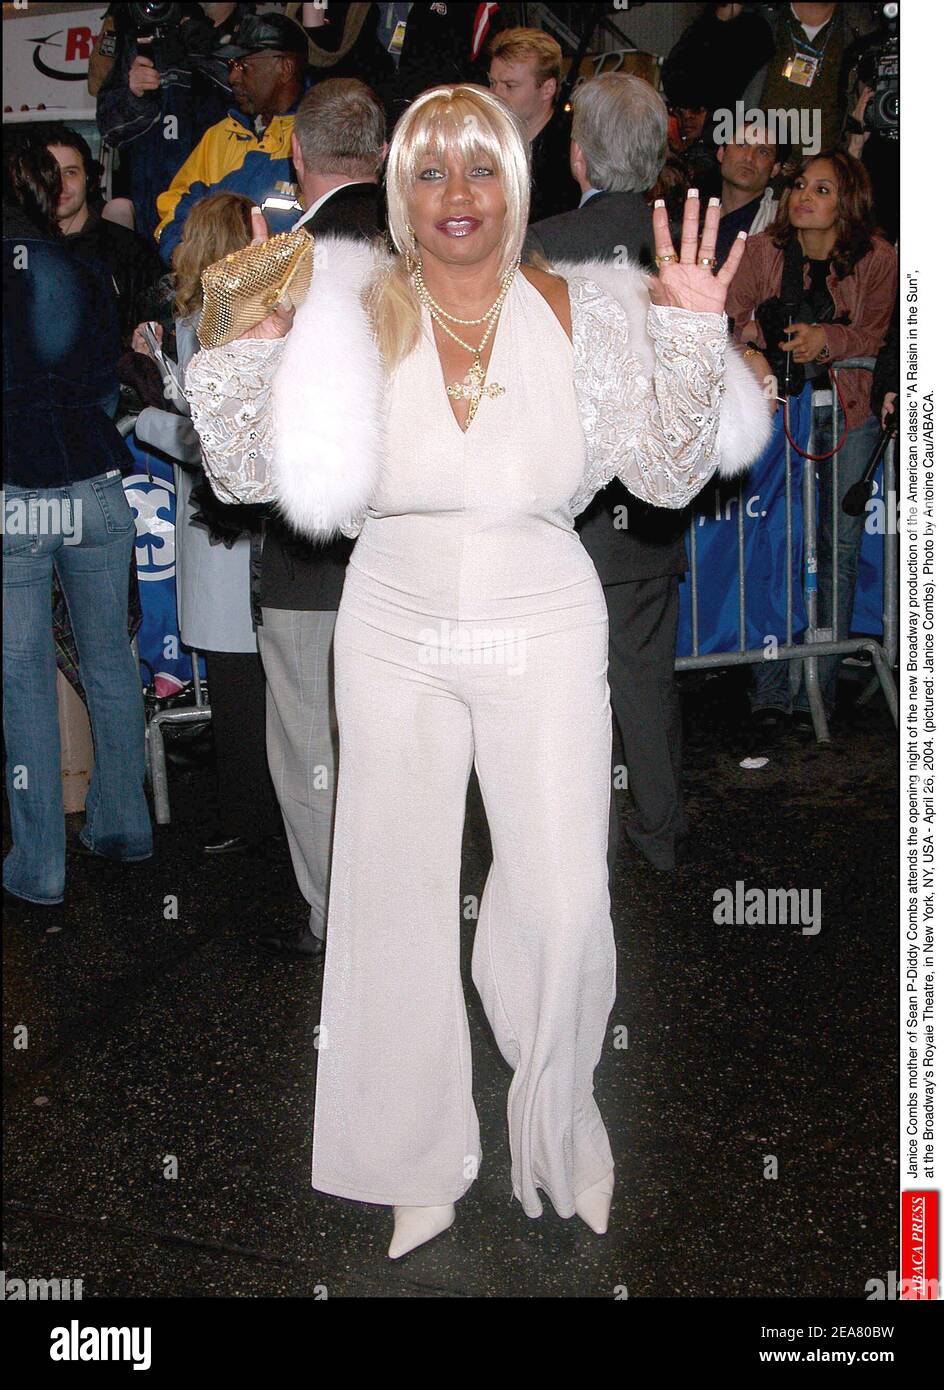 Janice Combs, the mother of Sean P-Diddy Combs attends the opening night of the new Broadway production of the American classic A Raisin in the Sun, at the Broadway's Royale Theatre, in New York, NY, USA - April 26, 2004. (pictured: Janice Combs). Photo by Antoine Cau/ABACA. Stock Photo